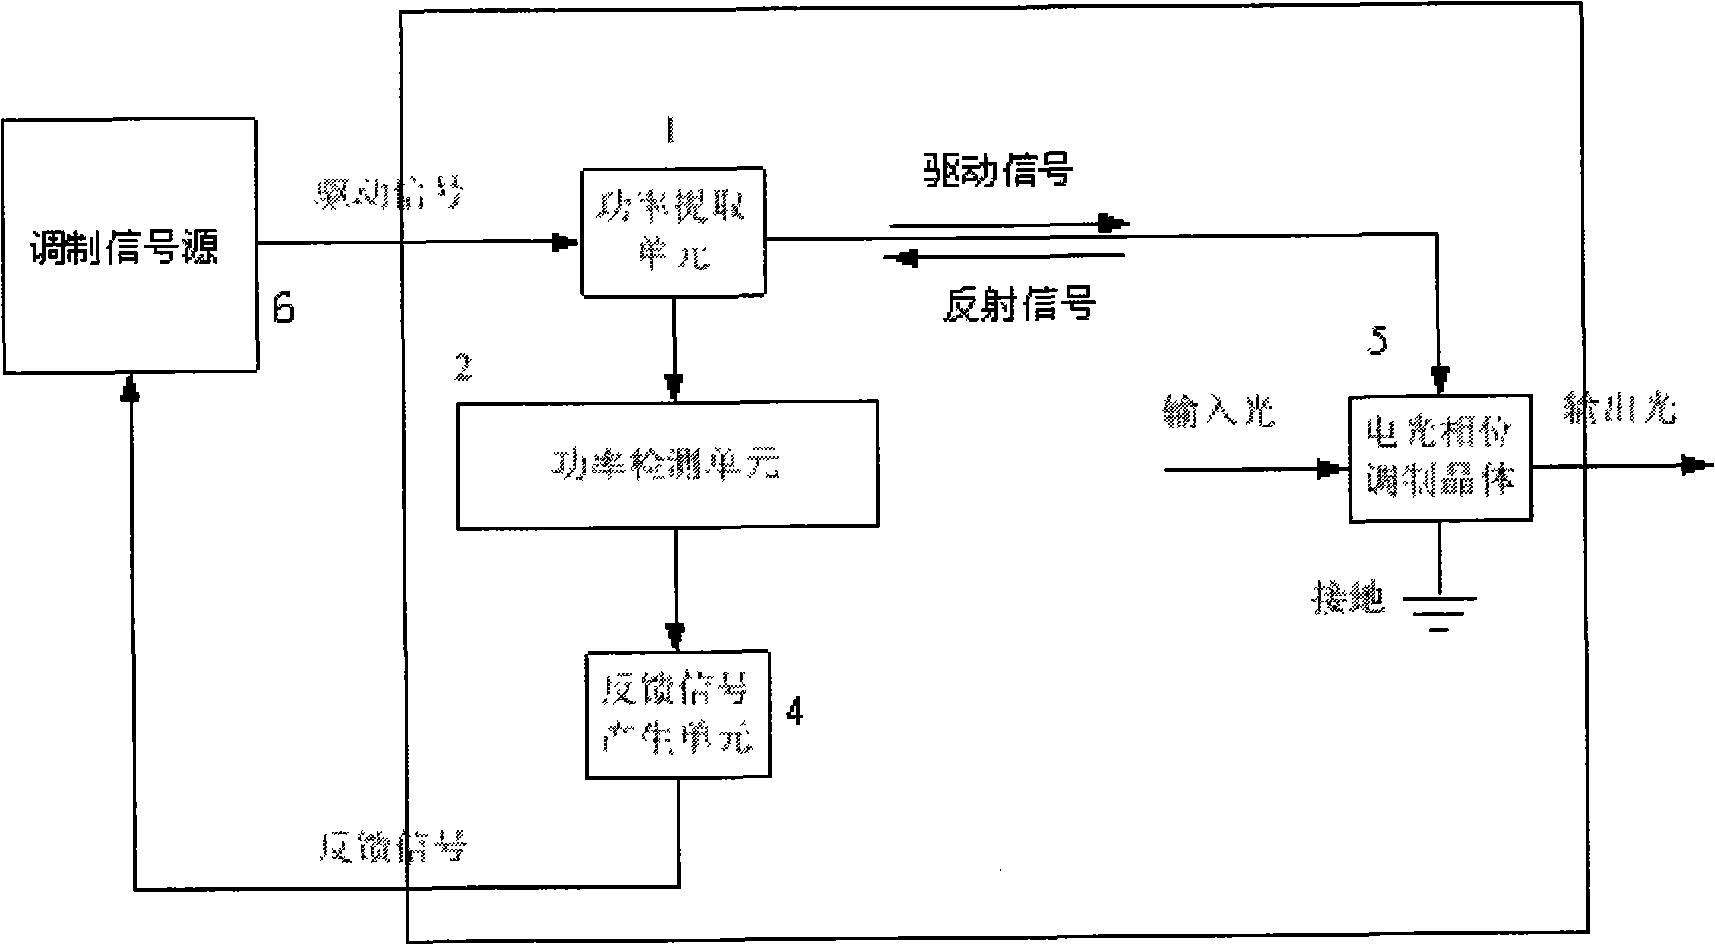 Electro optical phase modulator with frequency state feedback function